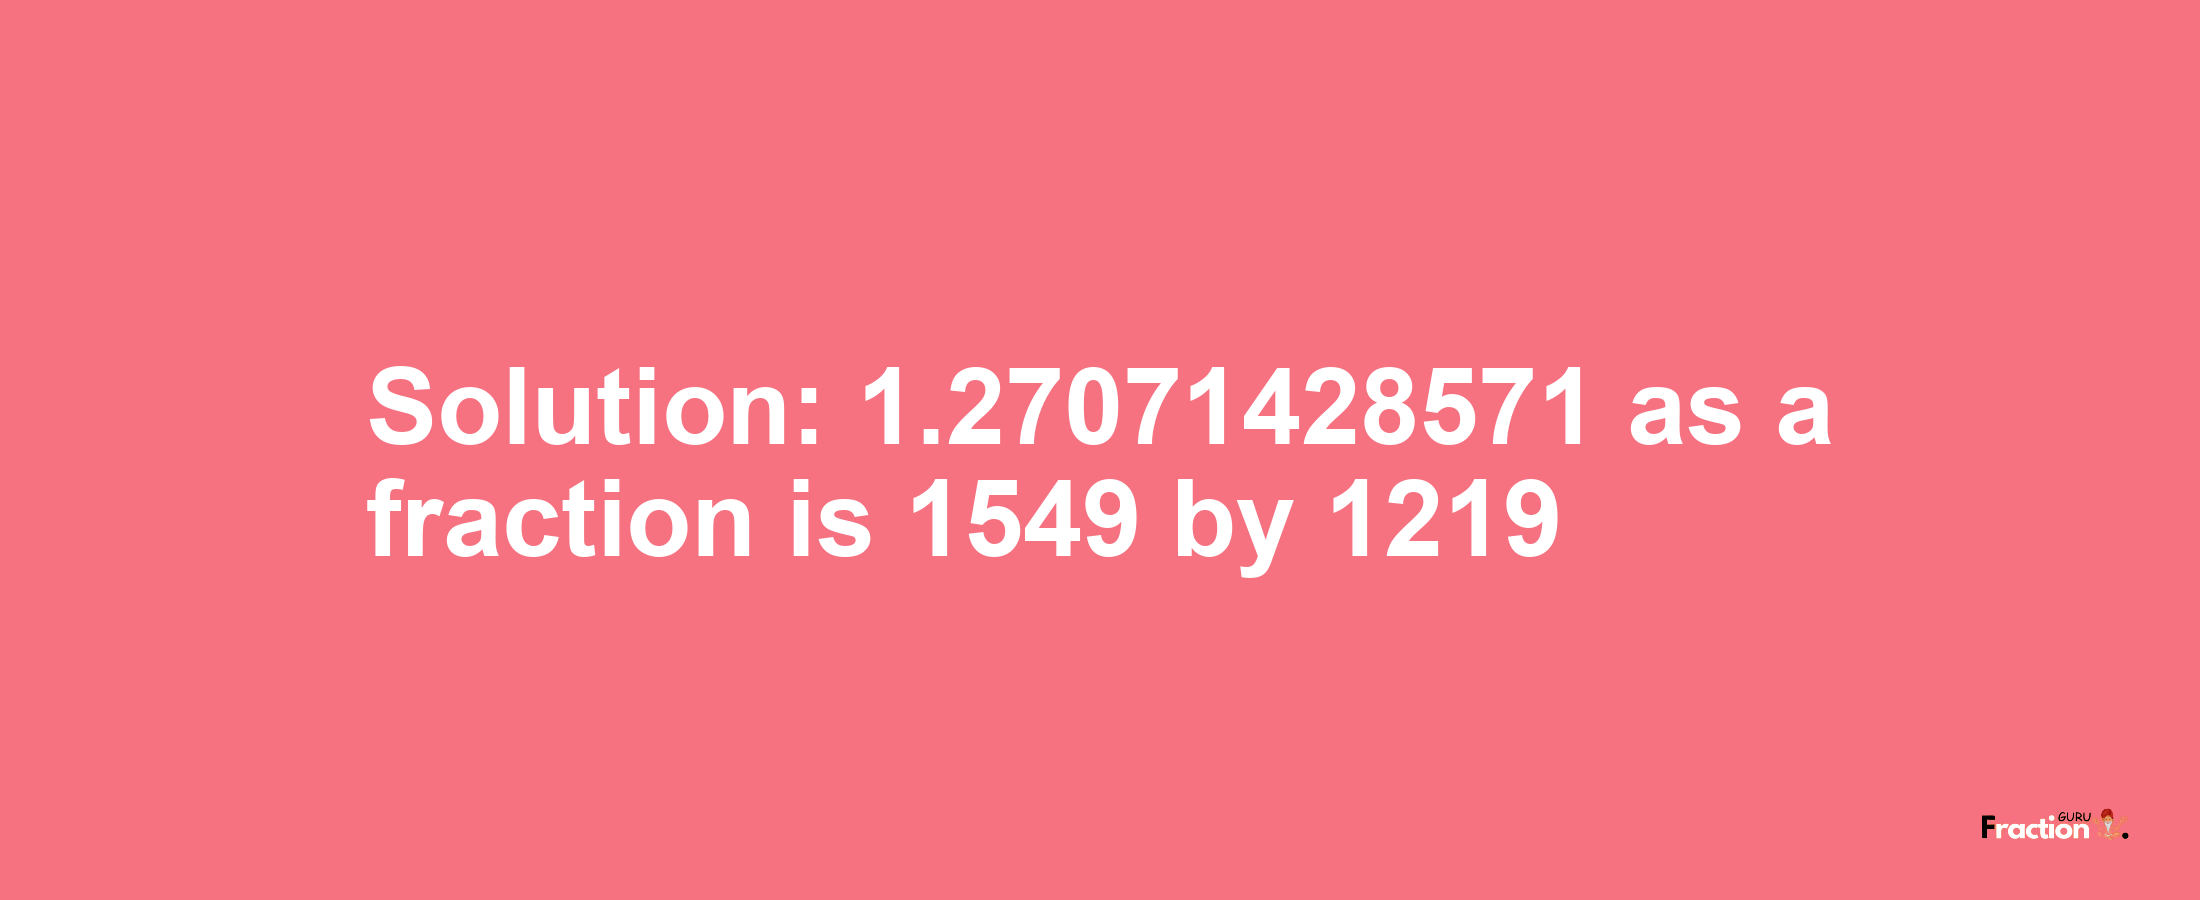 Solution:1.27071428571 as a fraction is 1549/1219